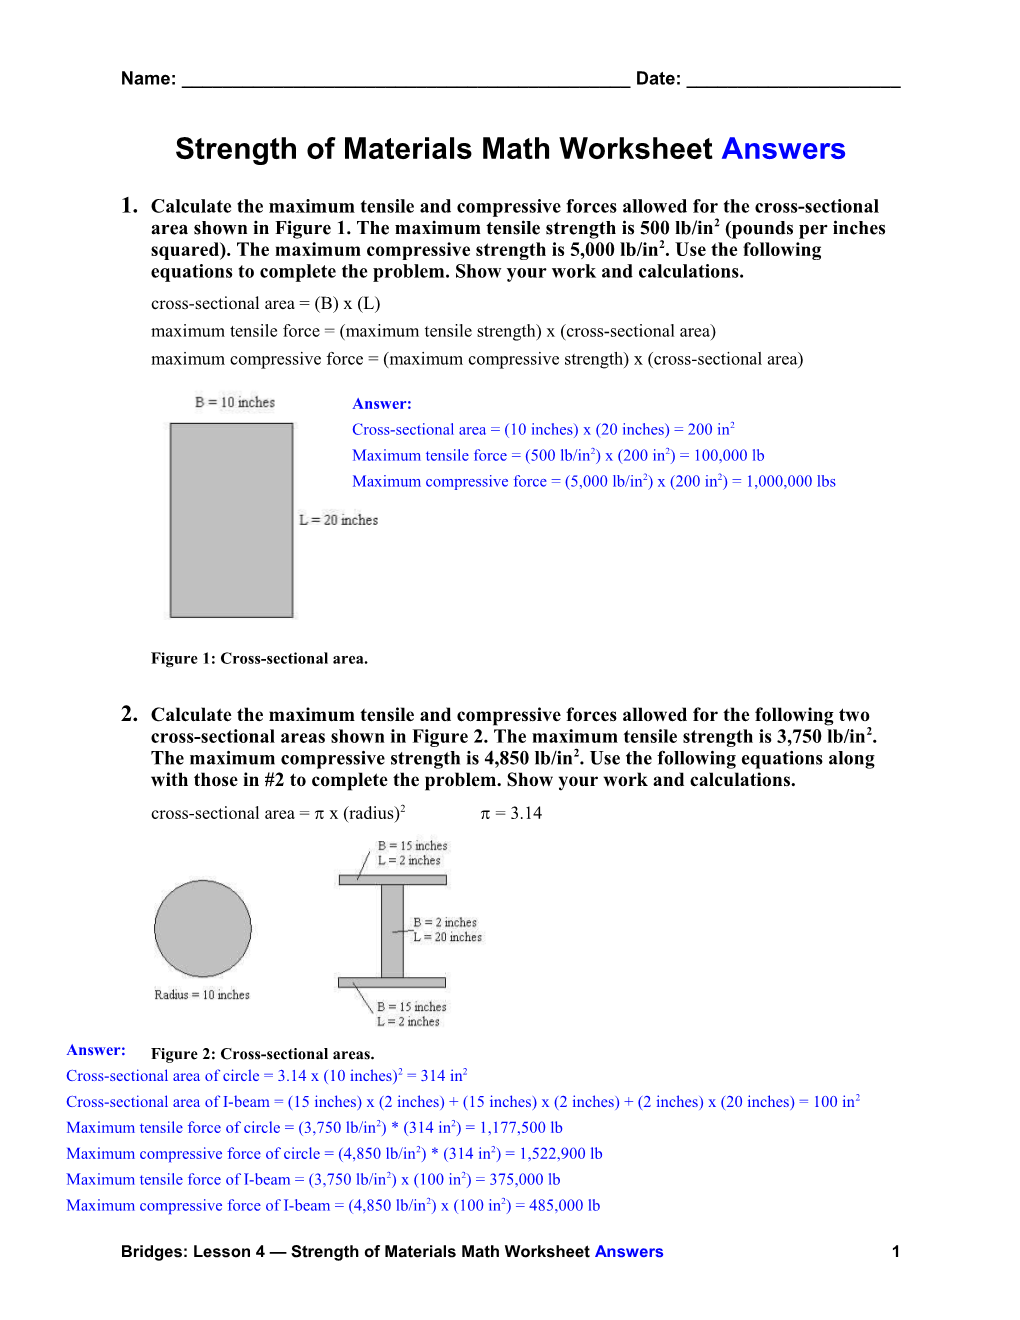 Strength of Materials Math Worksheet Answers